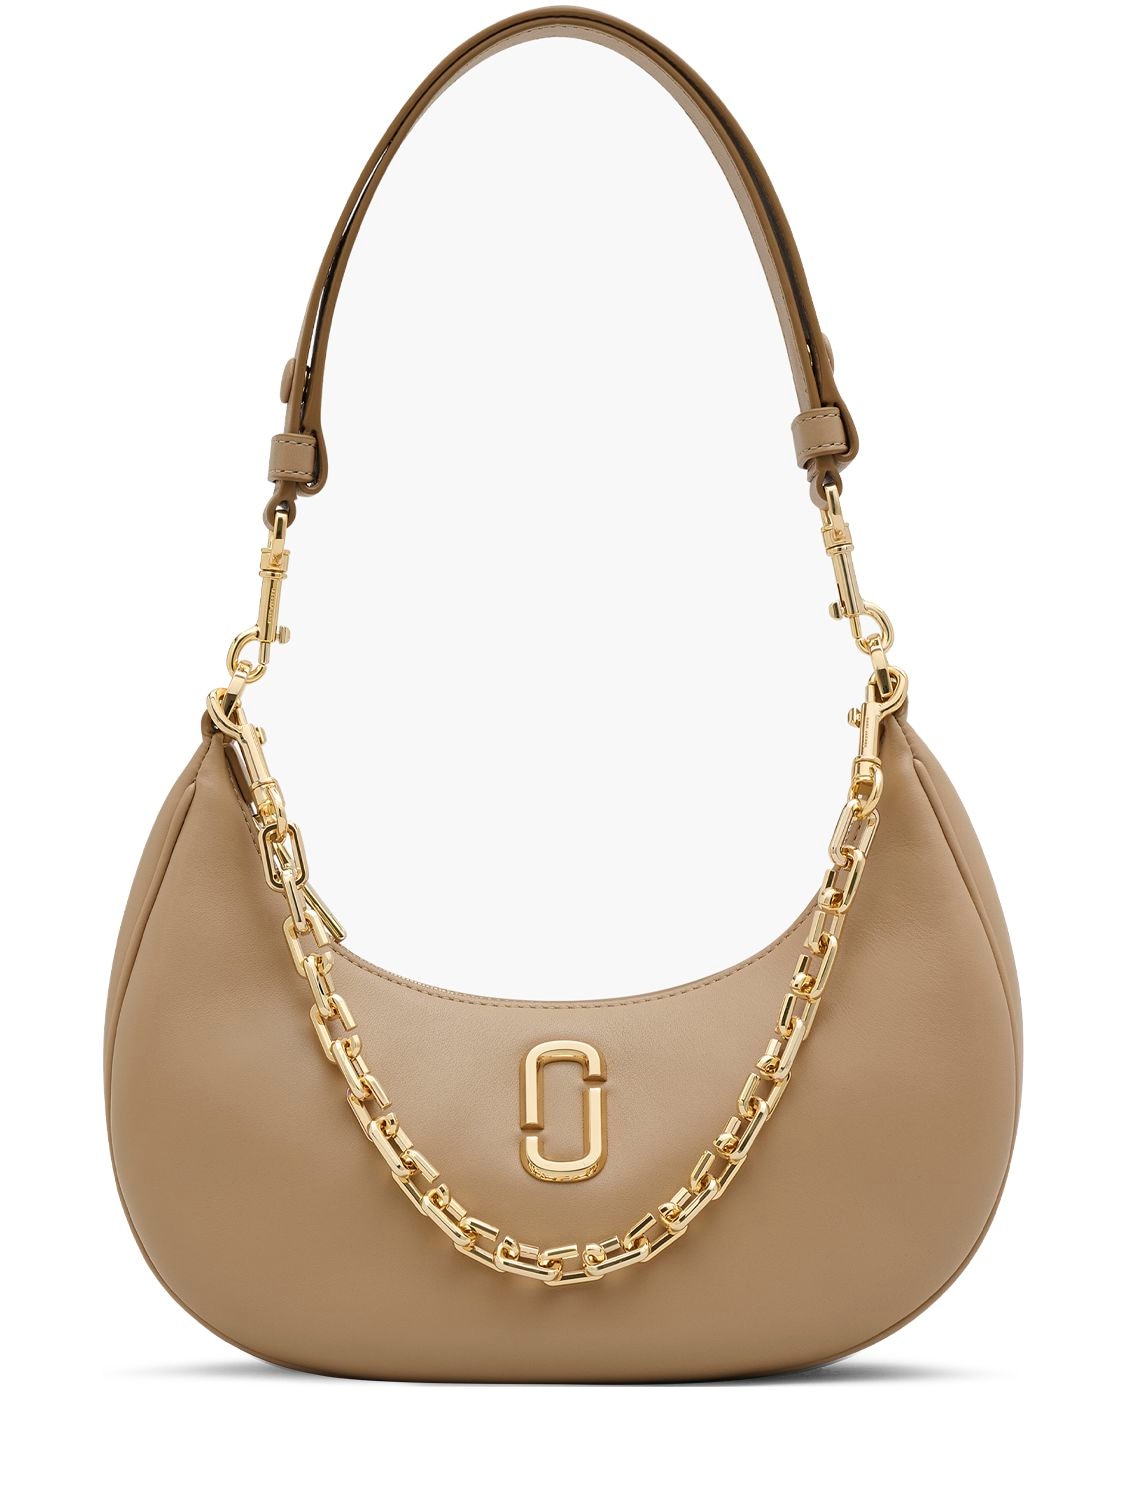 MARC JACOBS THE SMALL CURVE LEATHER SHOULDER BAG